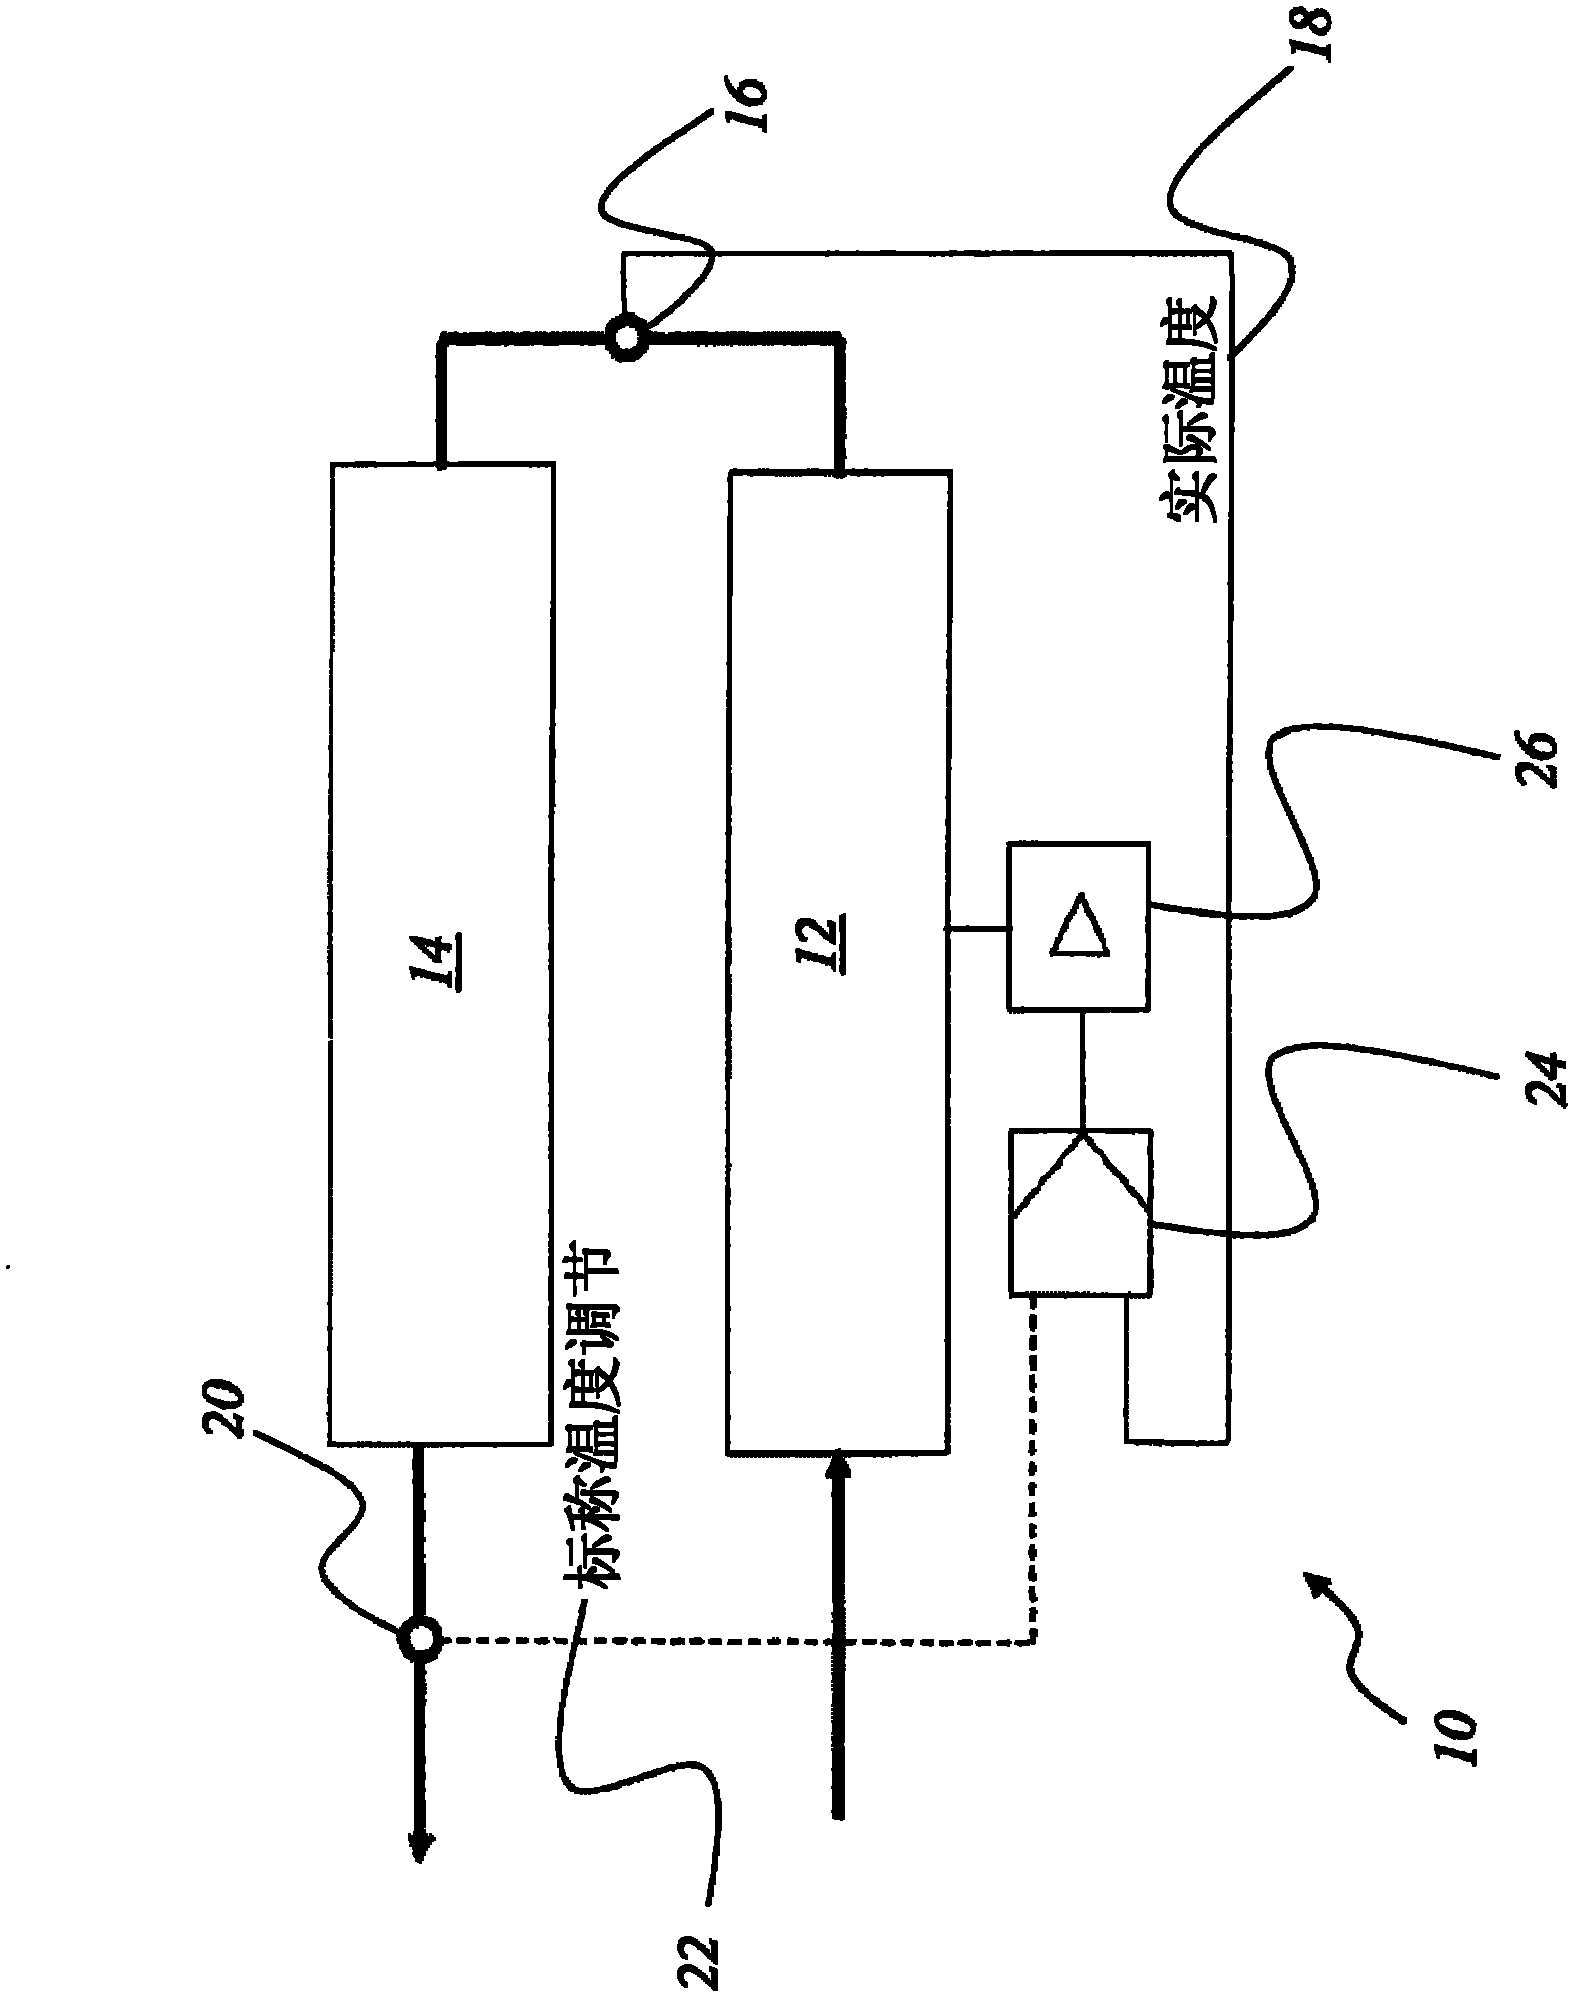 Apparatus and method for controlling and/or regulating temperature of a heating device for preforms